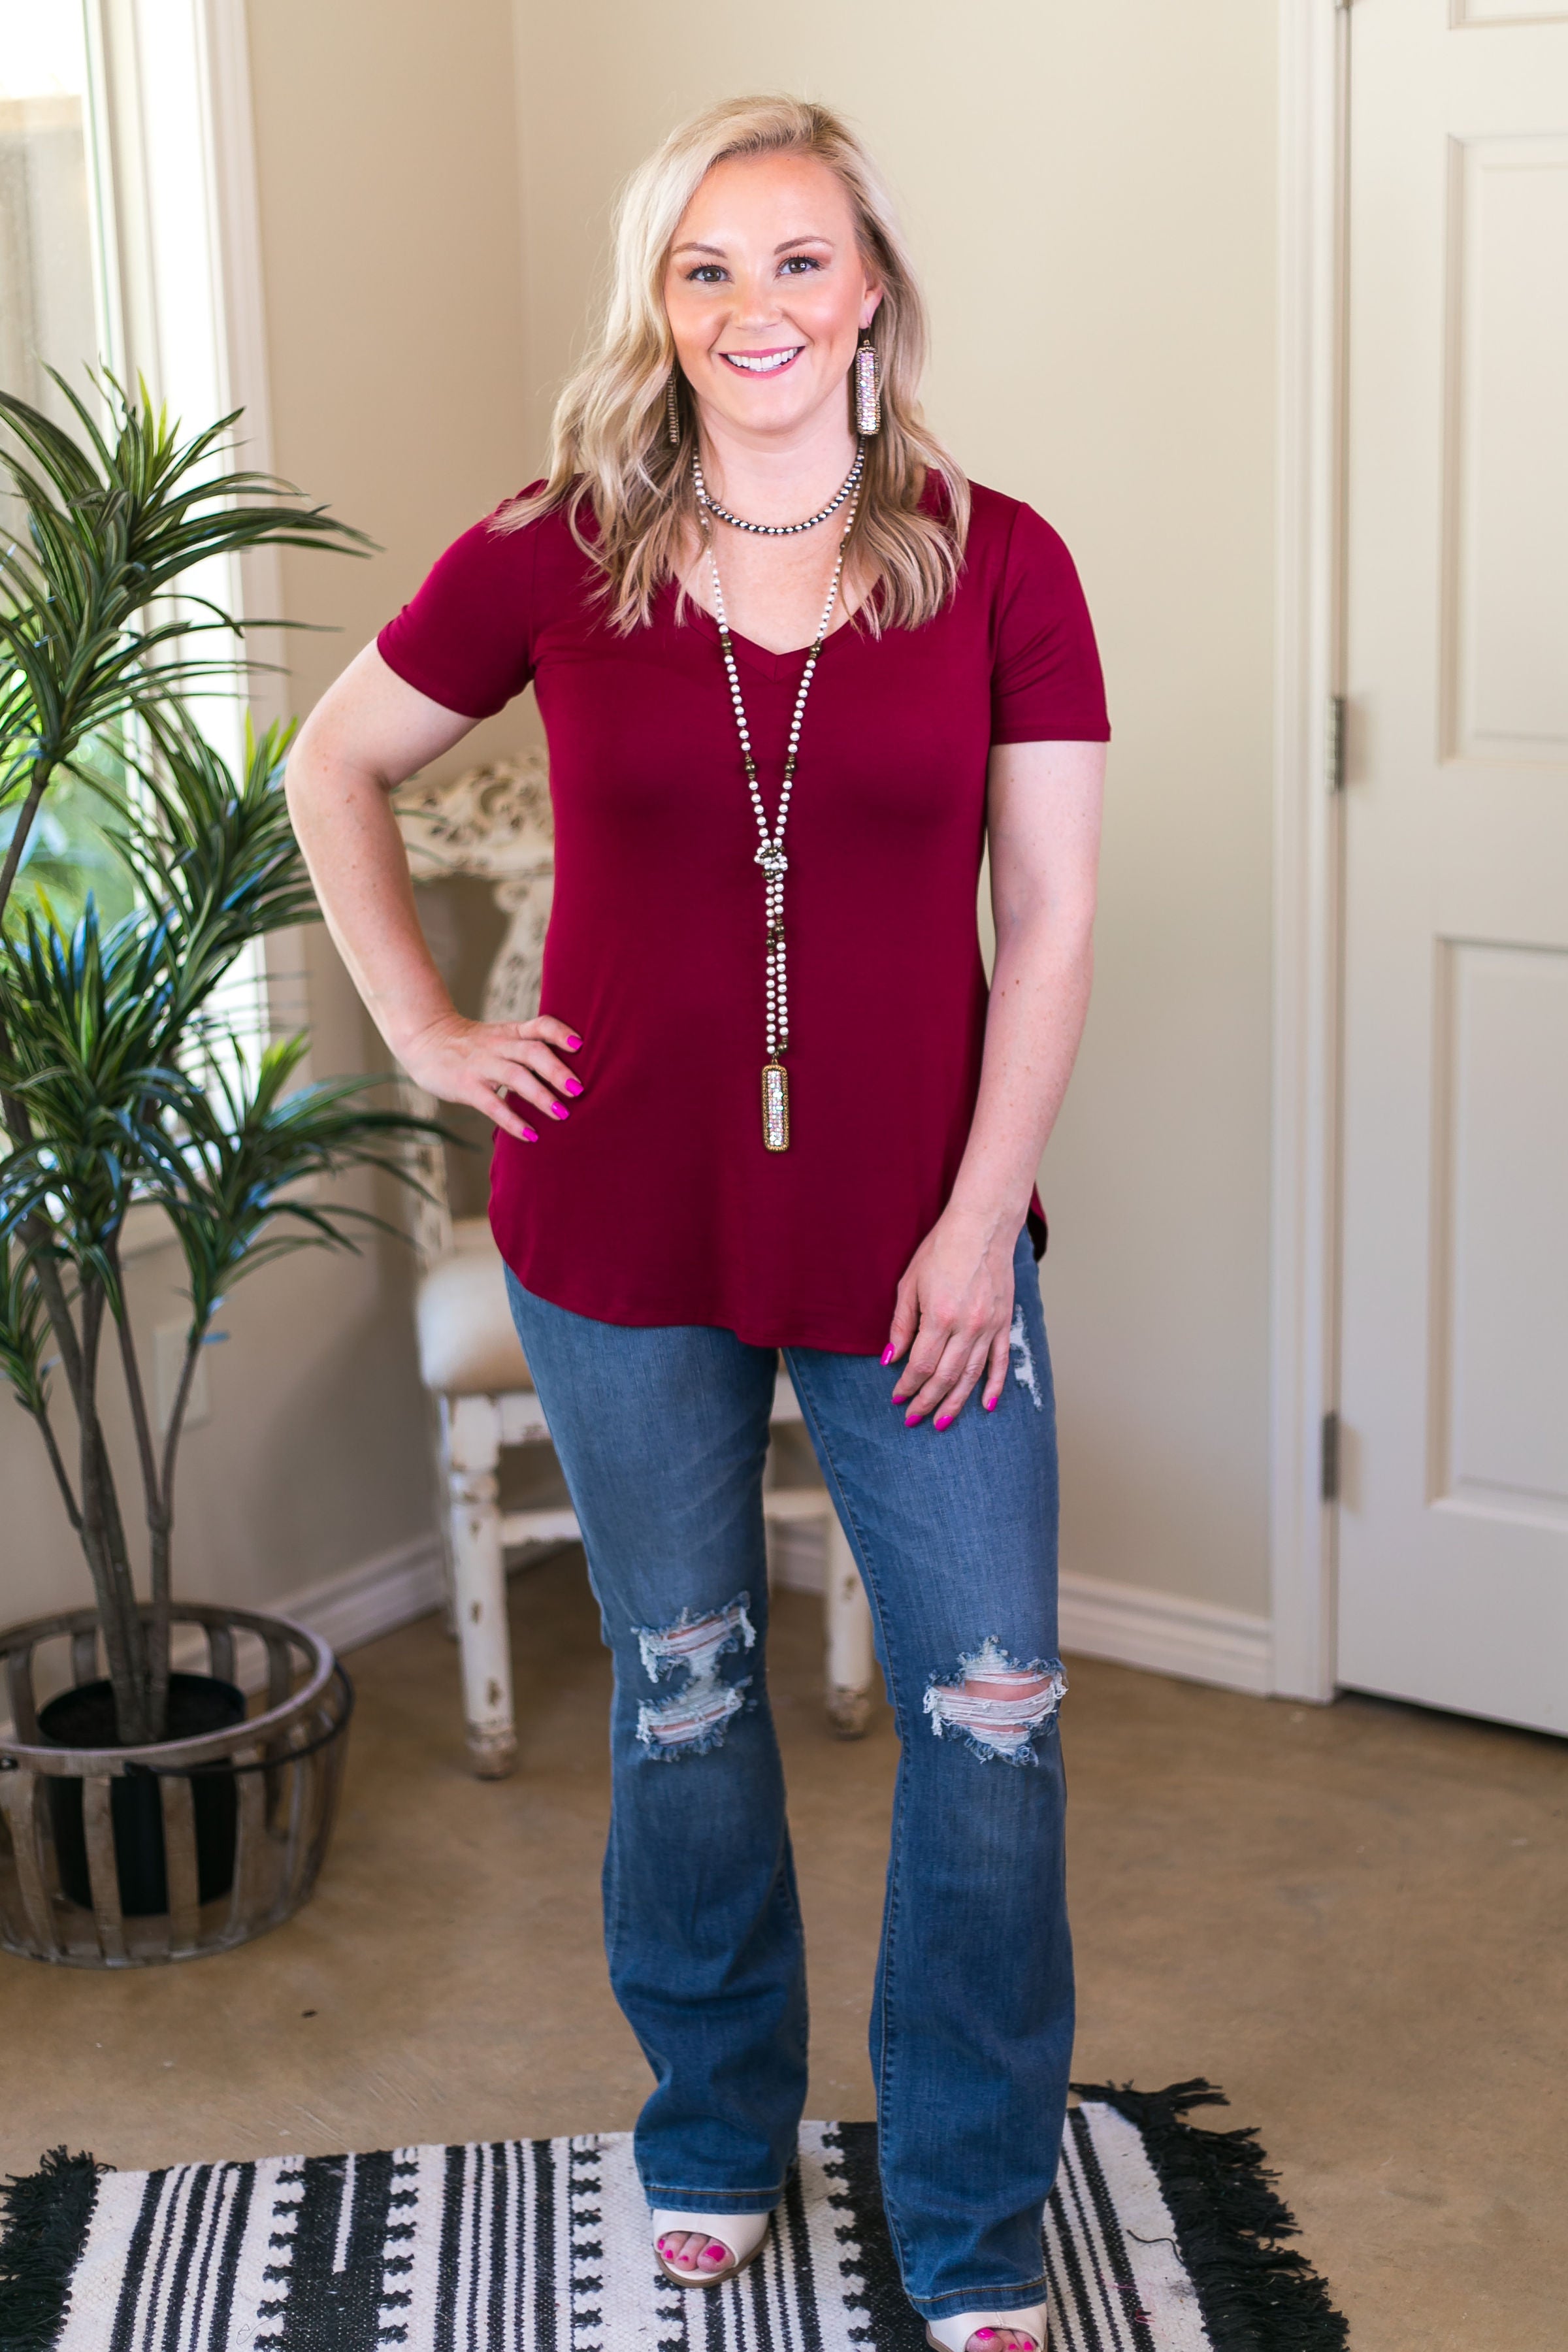 A.Gain solid simply the best Missy Curvy Plus Sizes Full Figured Fashion Plus Size boutique clothing shirt top blouse affordable short sleeve V neck vneck basic solid tee shirt tshirt maroon crimson 